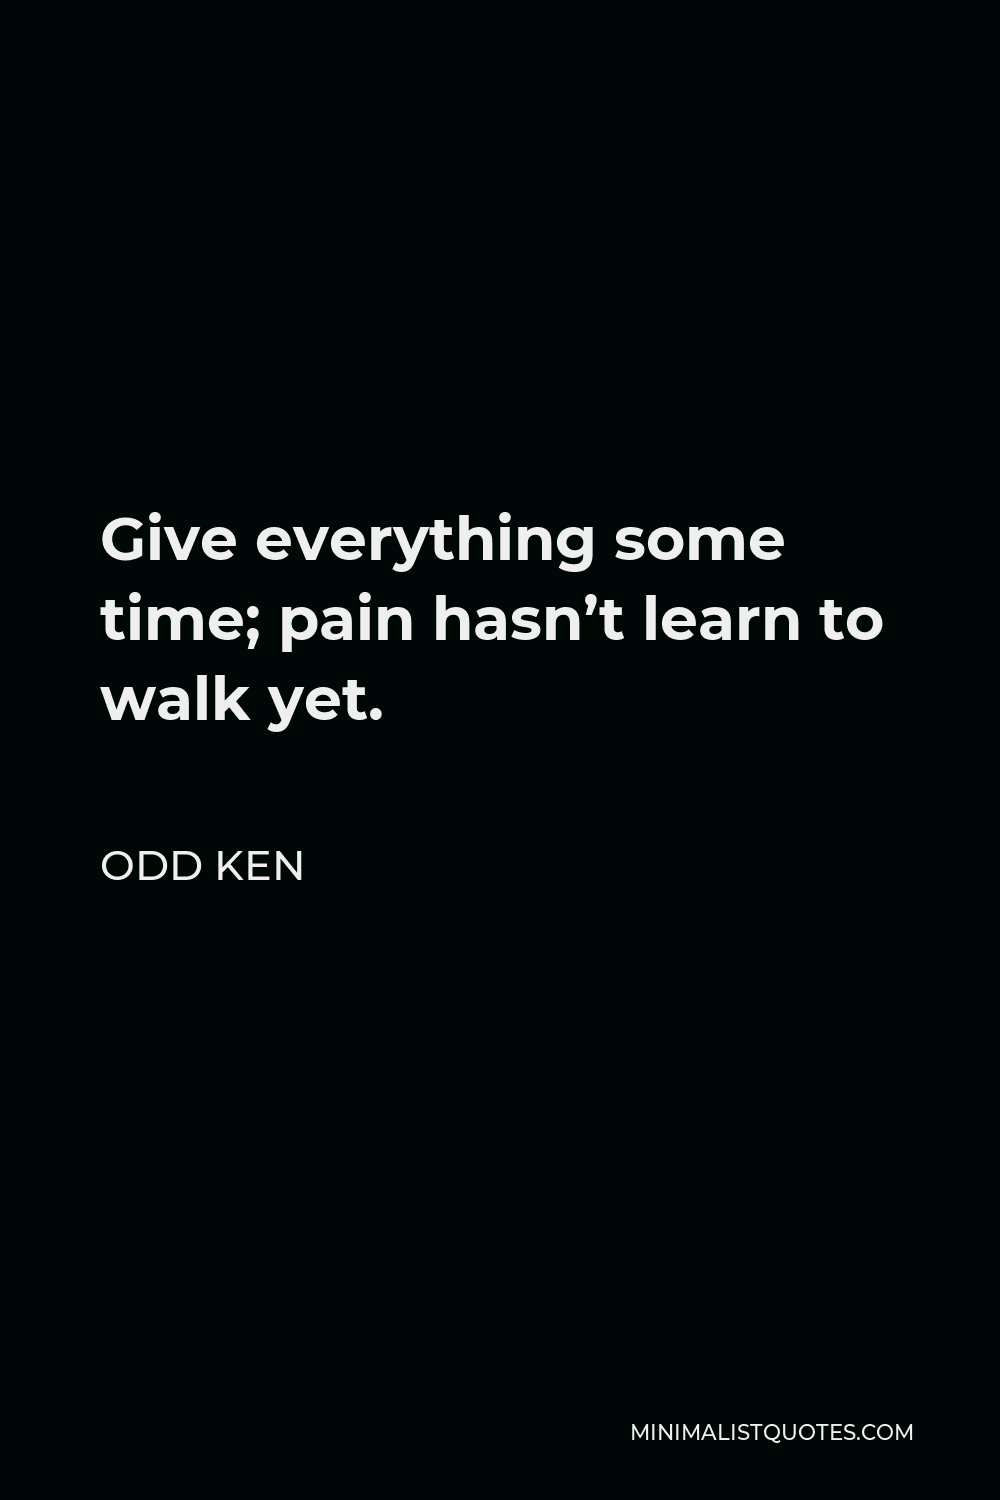 Odd Ken Quote - Give everything some time; pain hasn’t learn to walk yet.